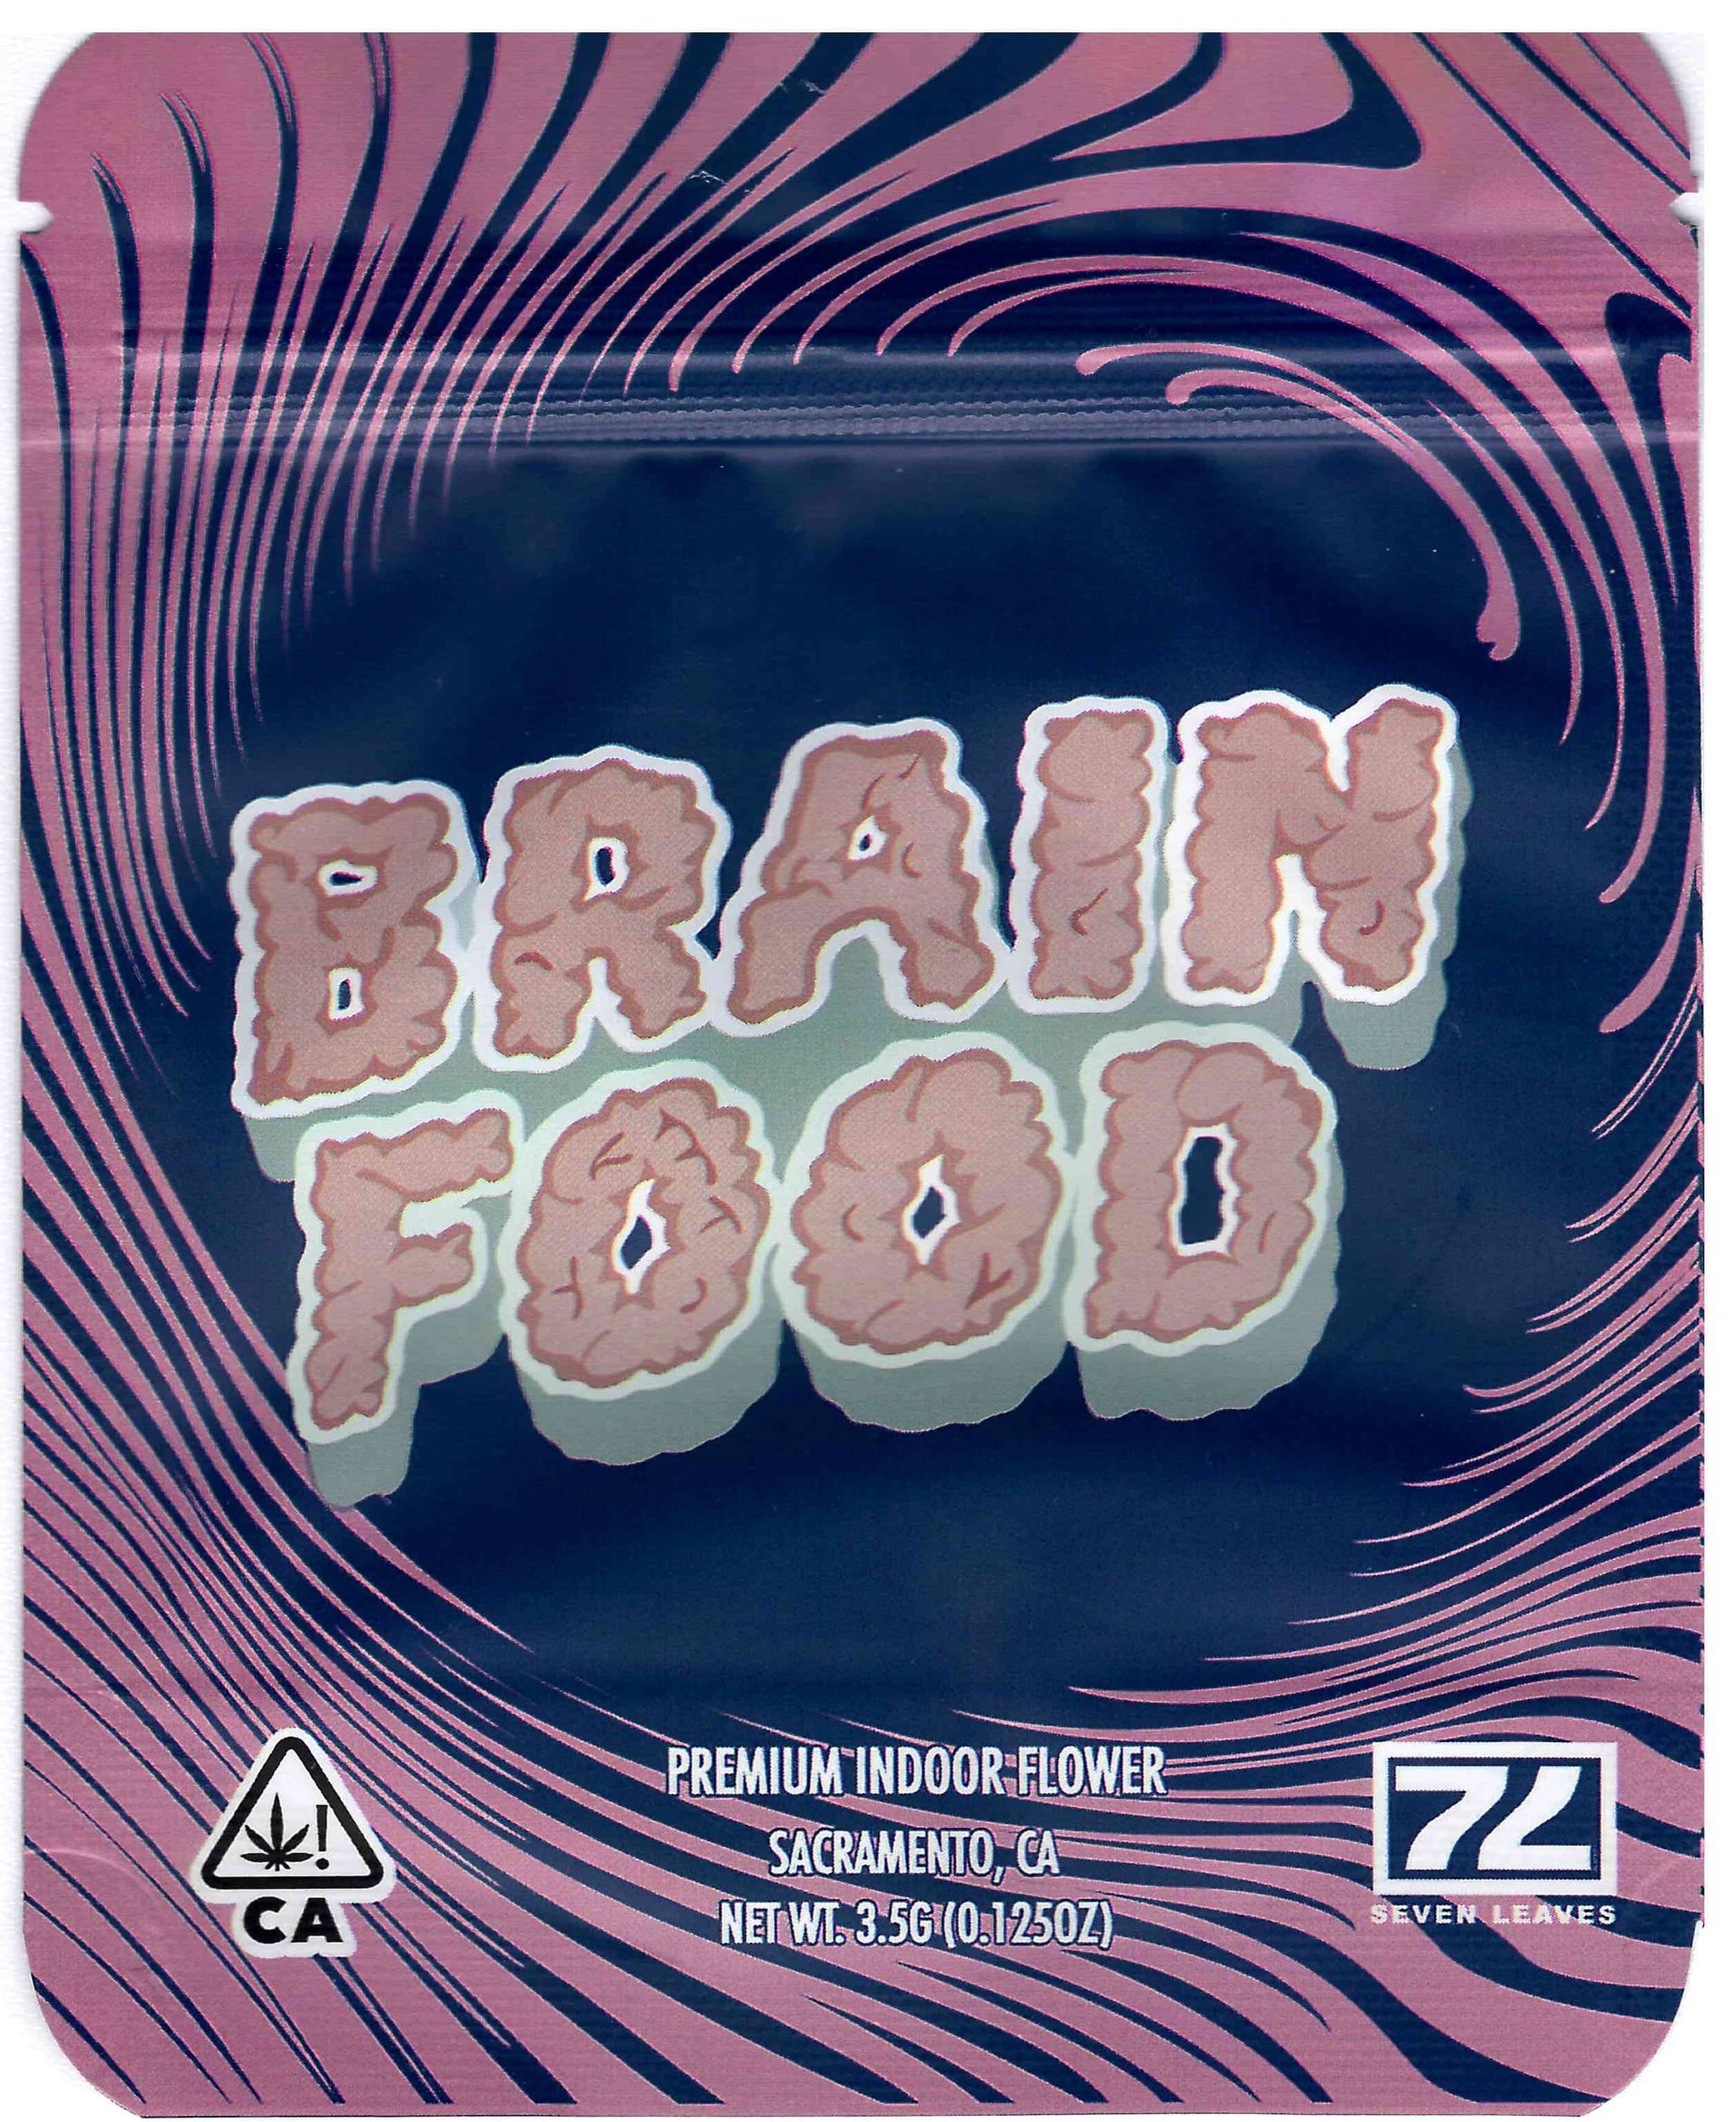 Brain Food Mylar Bags 3.5g Grams Seven Leaves MYLAR BAG WITH PRINTED GUSSET front